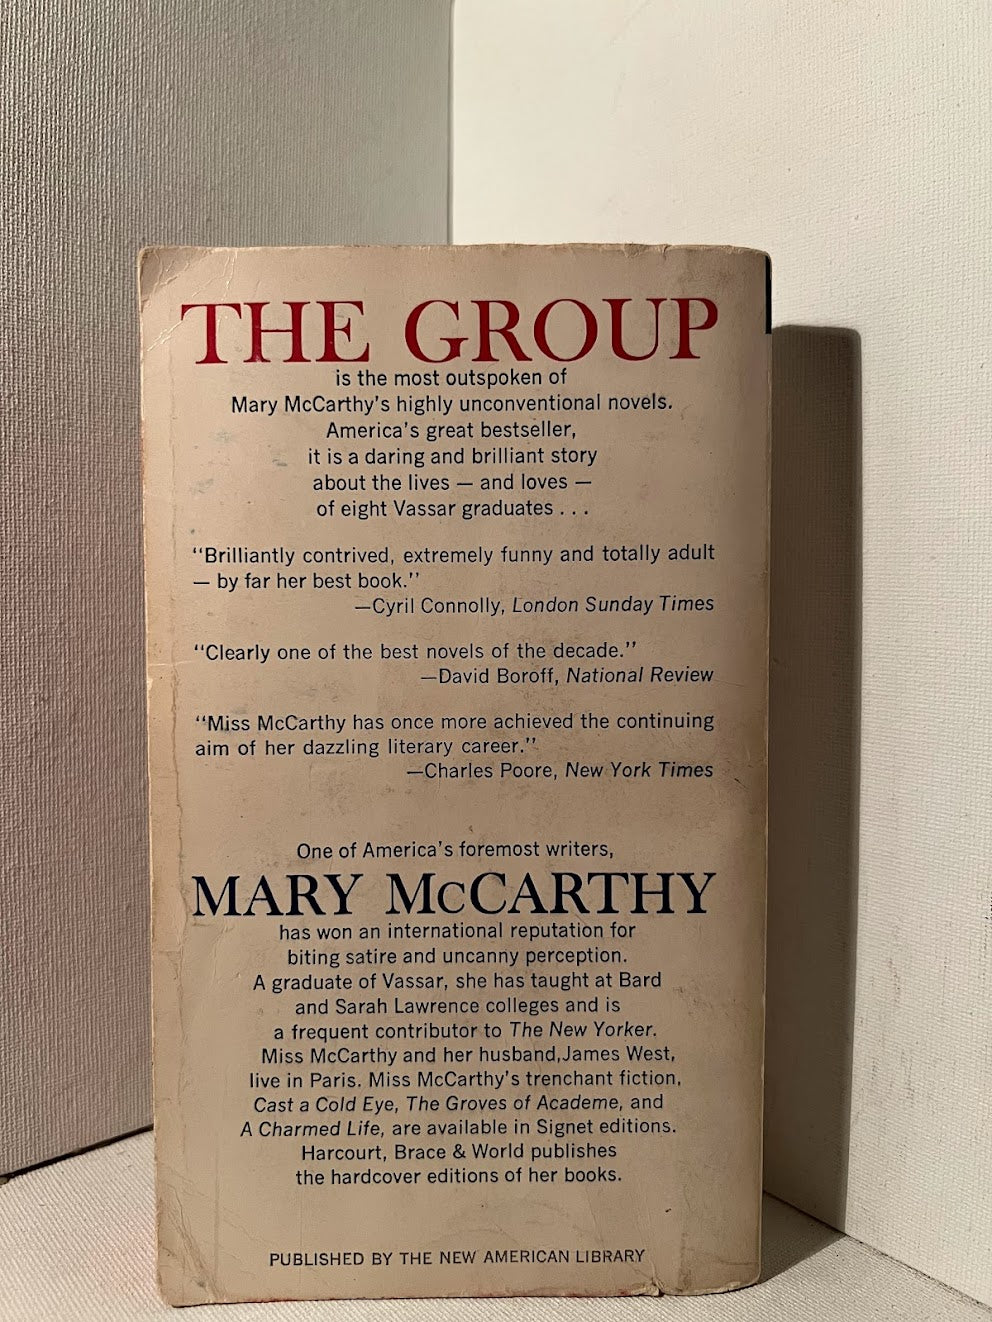 The Group by Mary McCarthy